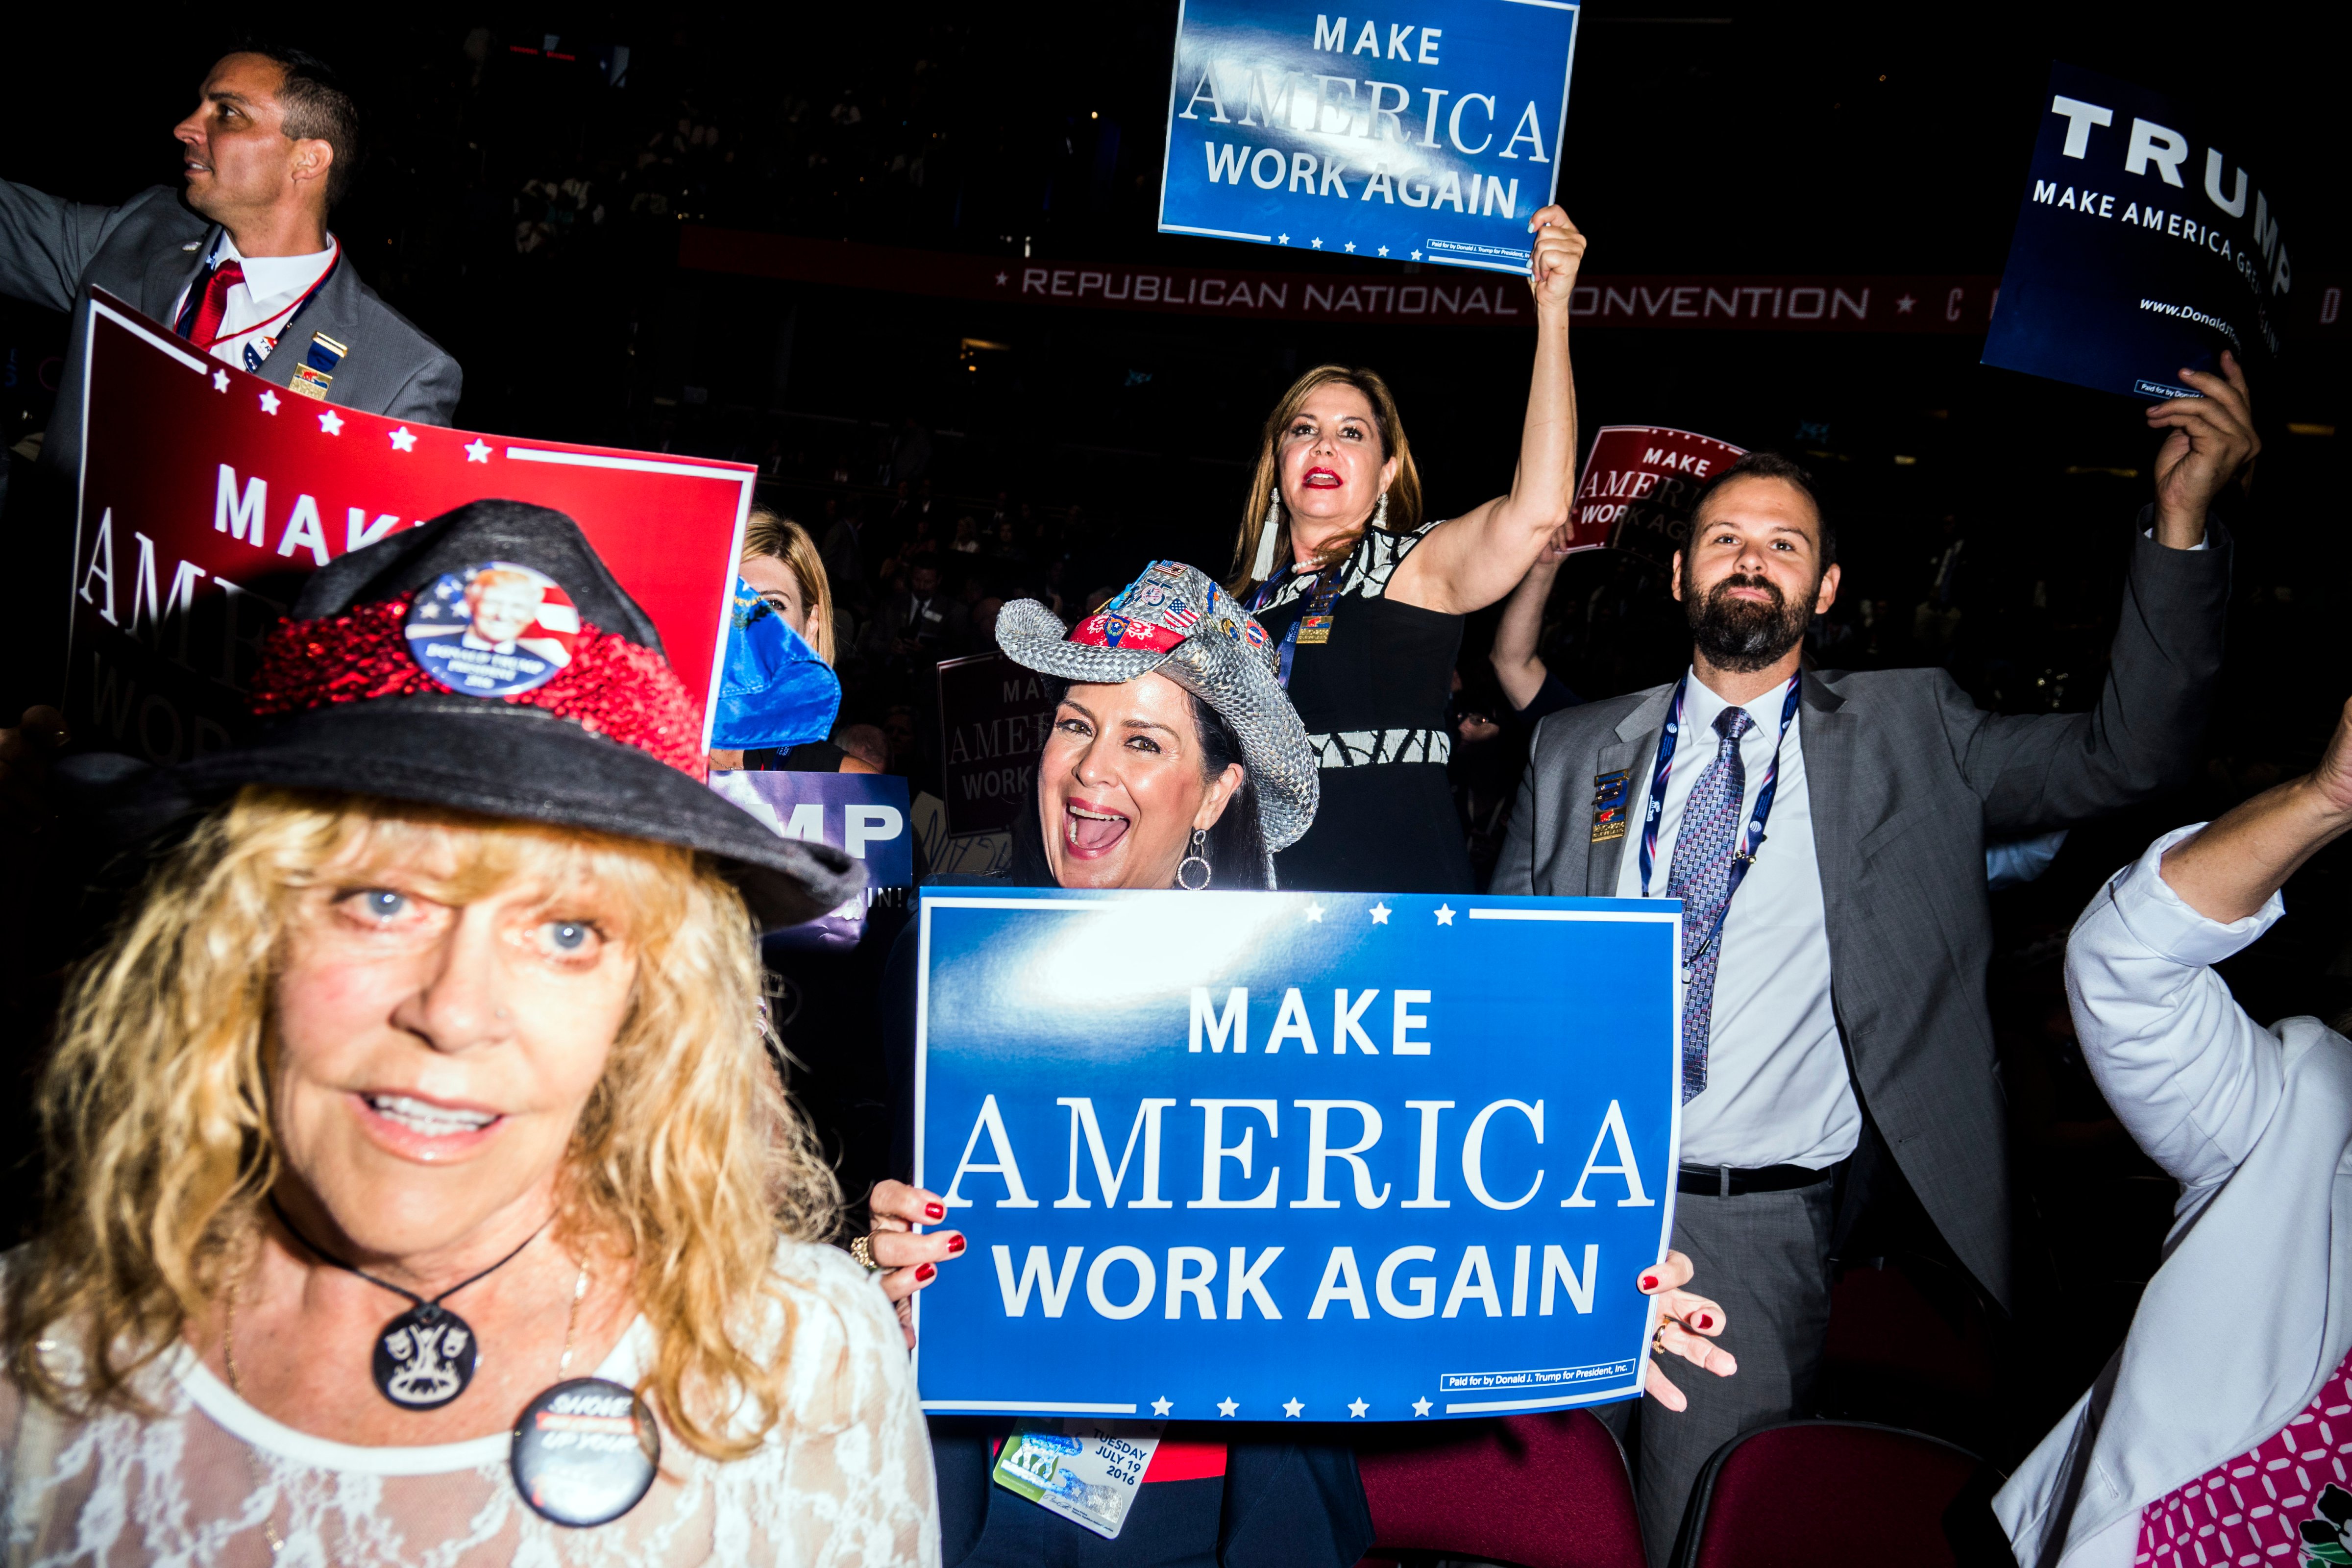 Attendees hold signs at the Republican National Convention in Cleveland on Tuesday, July 19, 2016. (Benjamin Lowy for TIME)